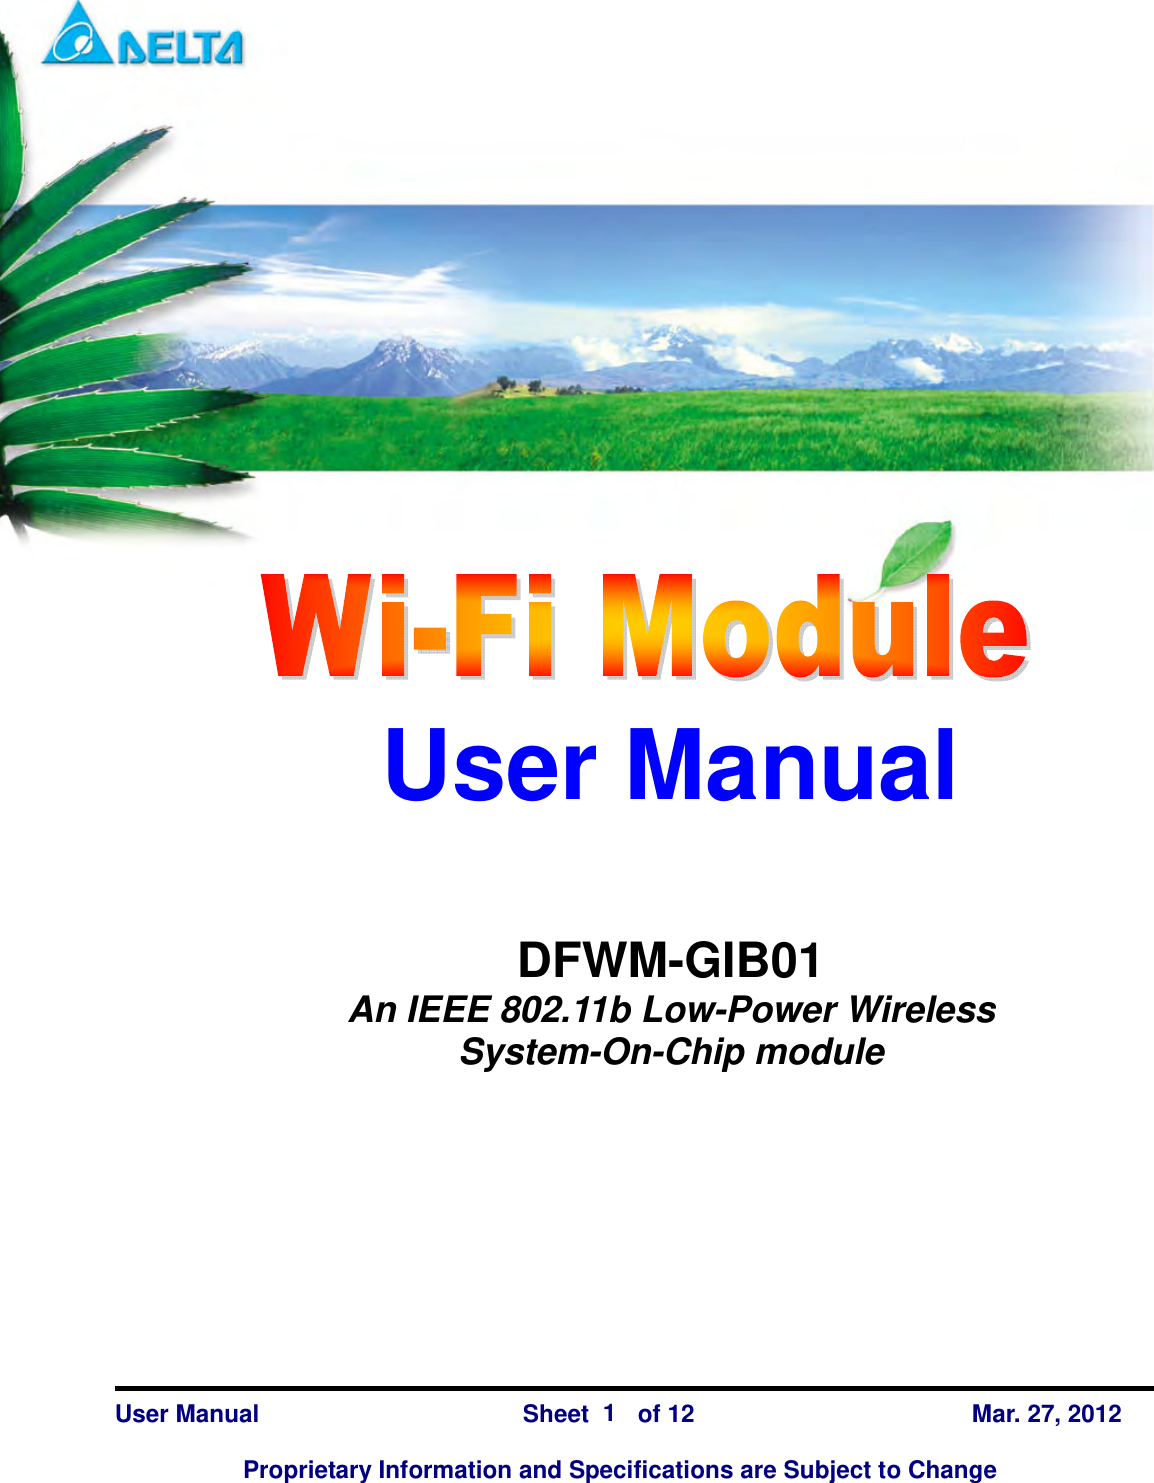   DFWM-GIB01    User Manual                Sheet    of 12      Mar. 27, 2012  Proprietary Information and Specifications are Subject to Change 1  User Manual   DFWM-GIB01 An IEEE 802.11b Low-Power Wireless System-On-Chip module 